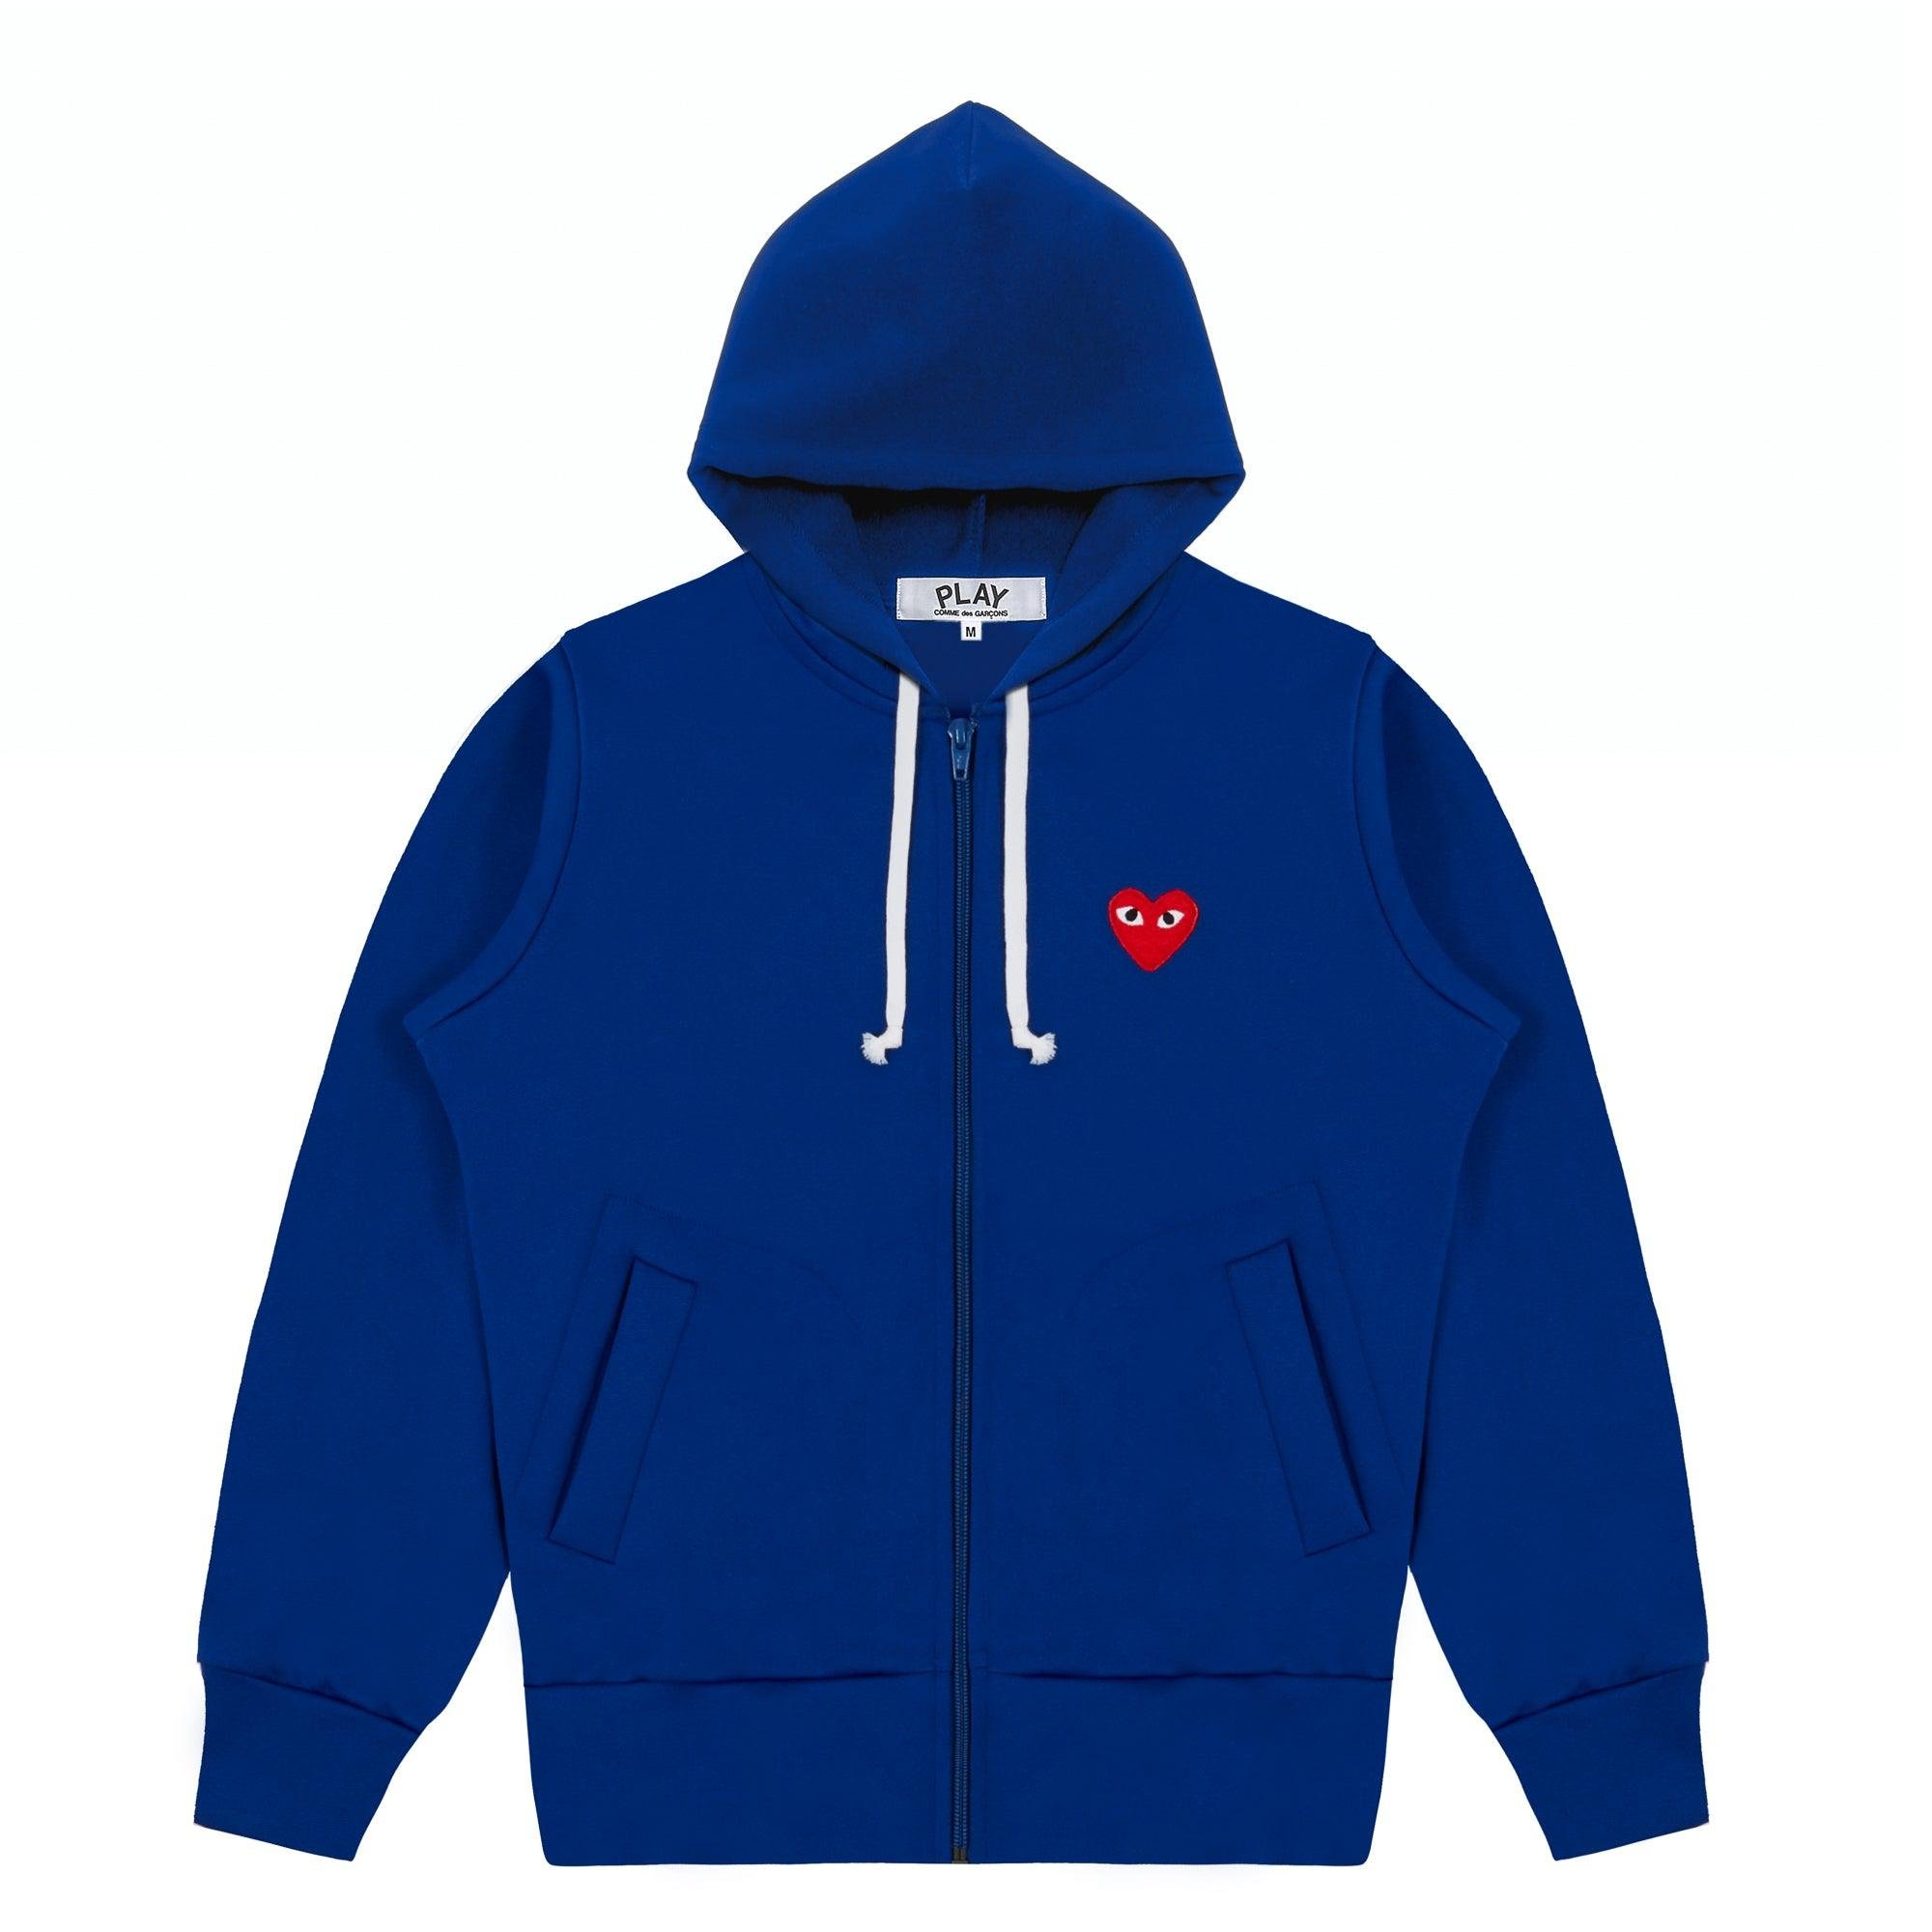 Play Comme des Garçons - Hooded Zip-Up - (Navy) by COMME DES GARCONS